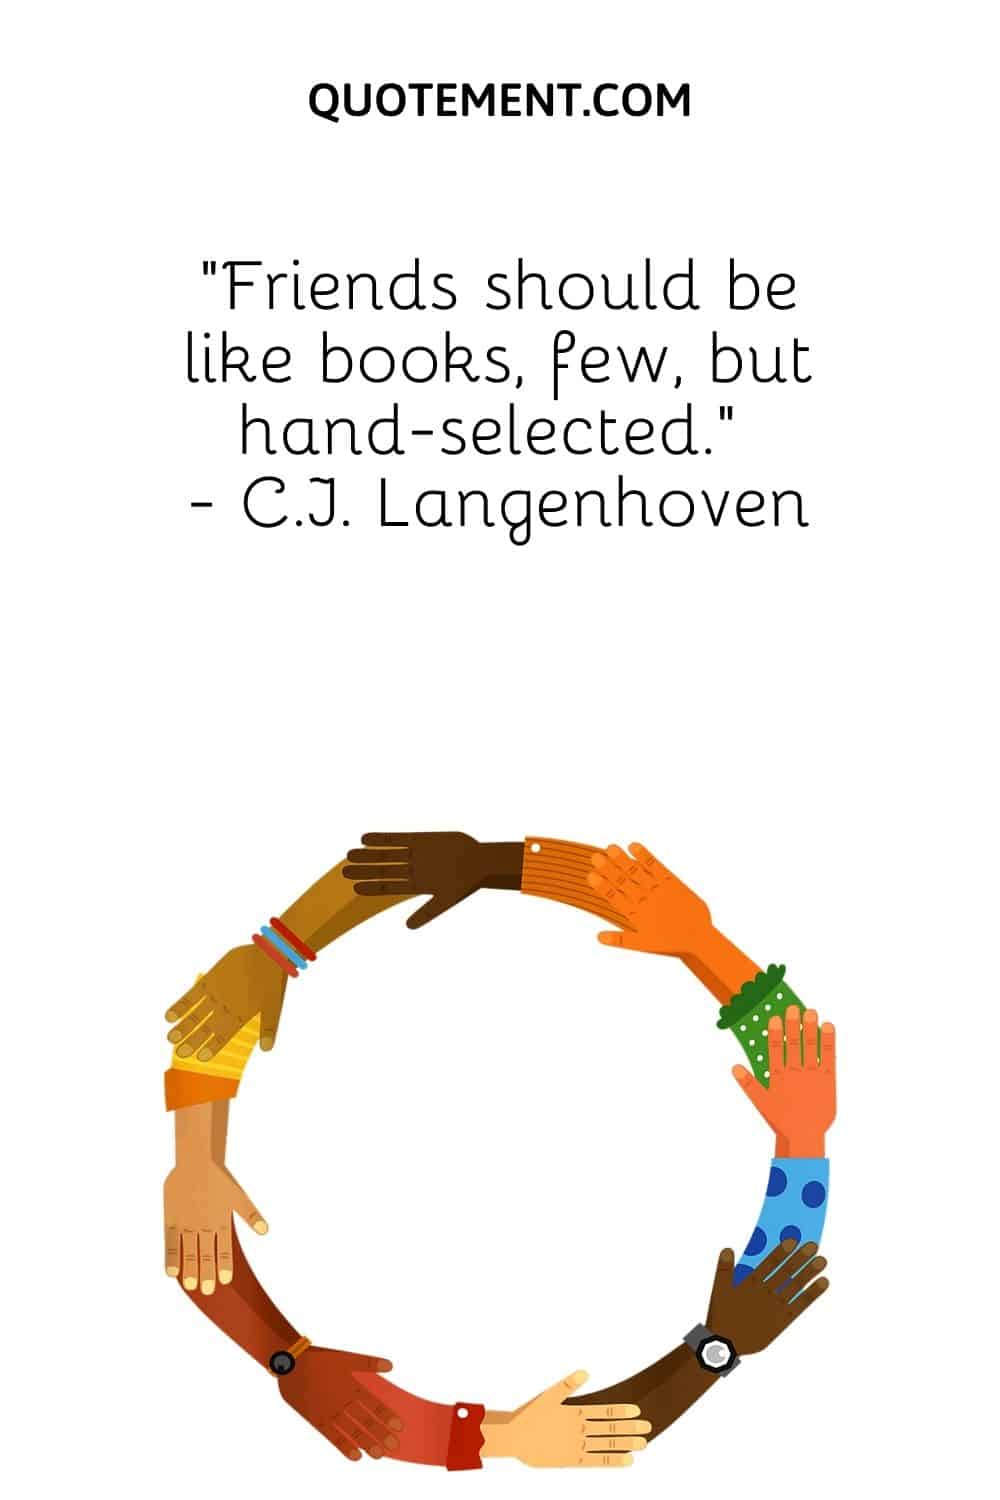 “Friends should be like books, few, but hand-selected.” - C.J. Langenhoven